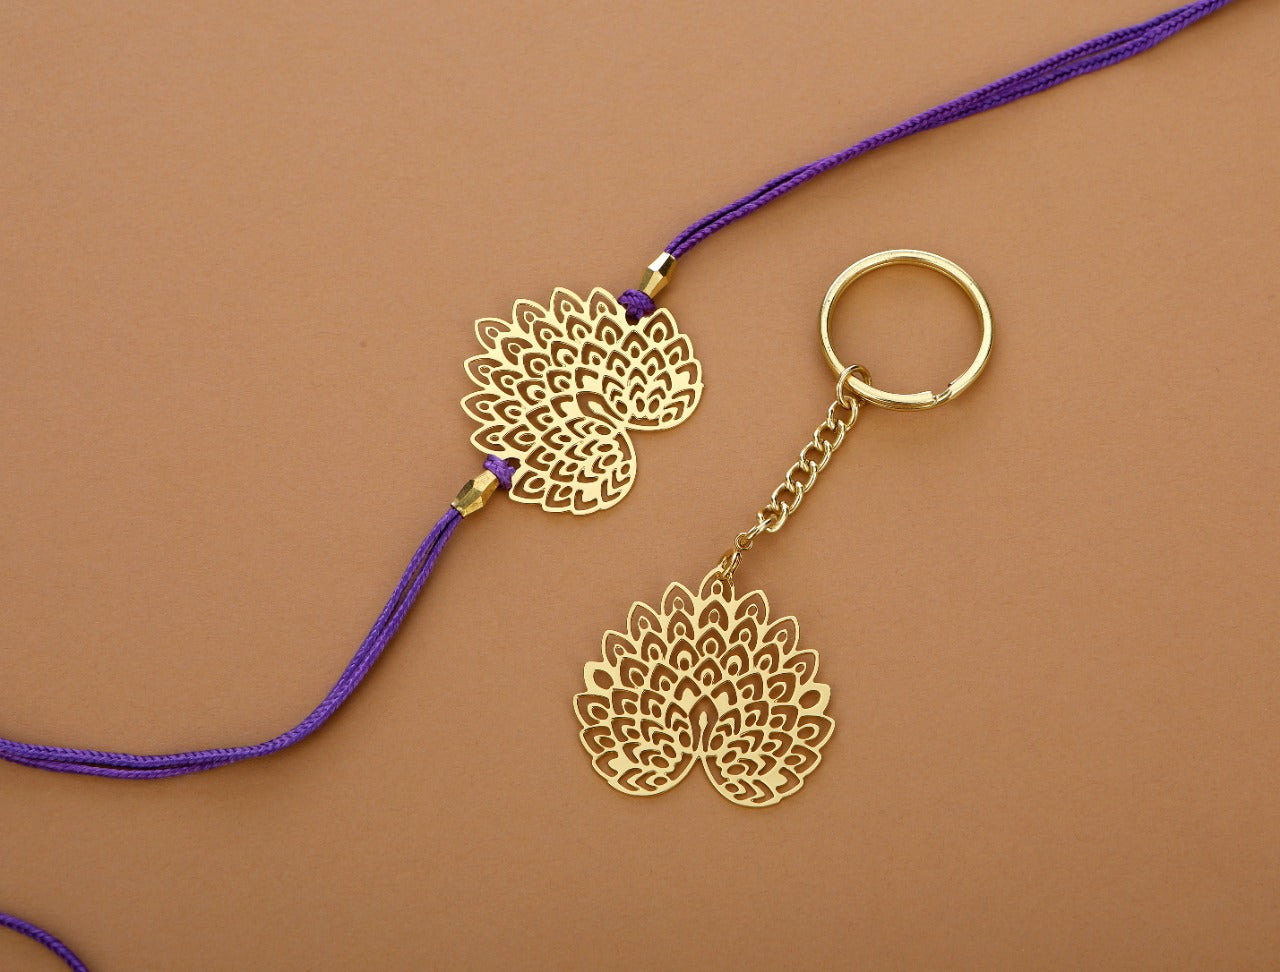 Peacock design Rakhi cum keychain ring for Bhai/brother crafted in brass with golden finish